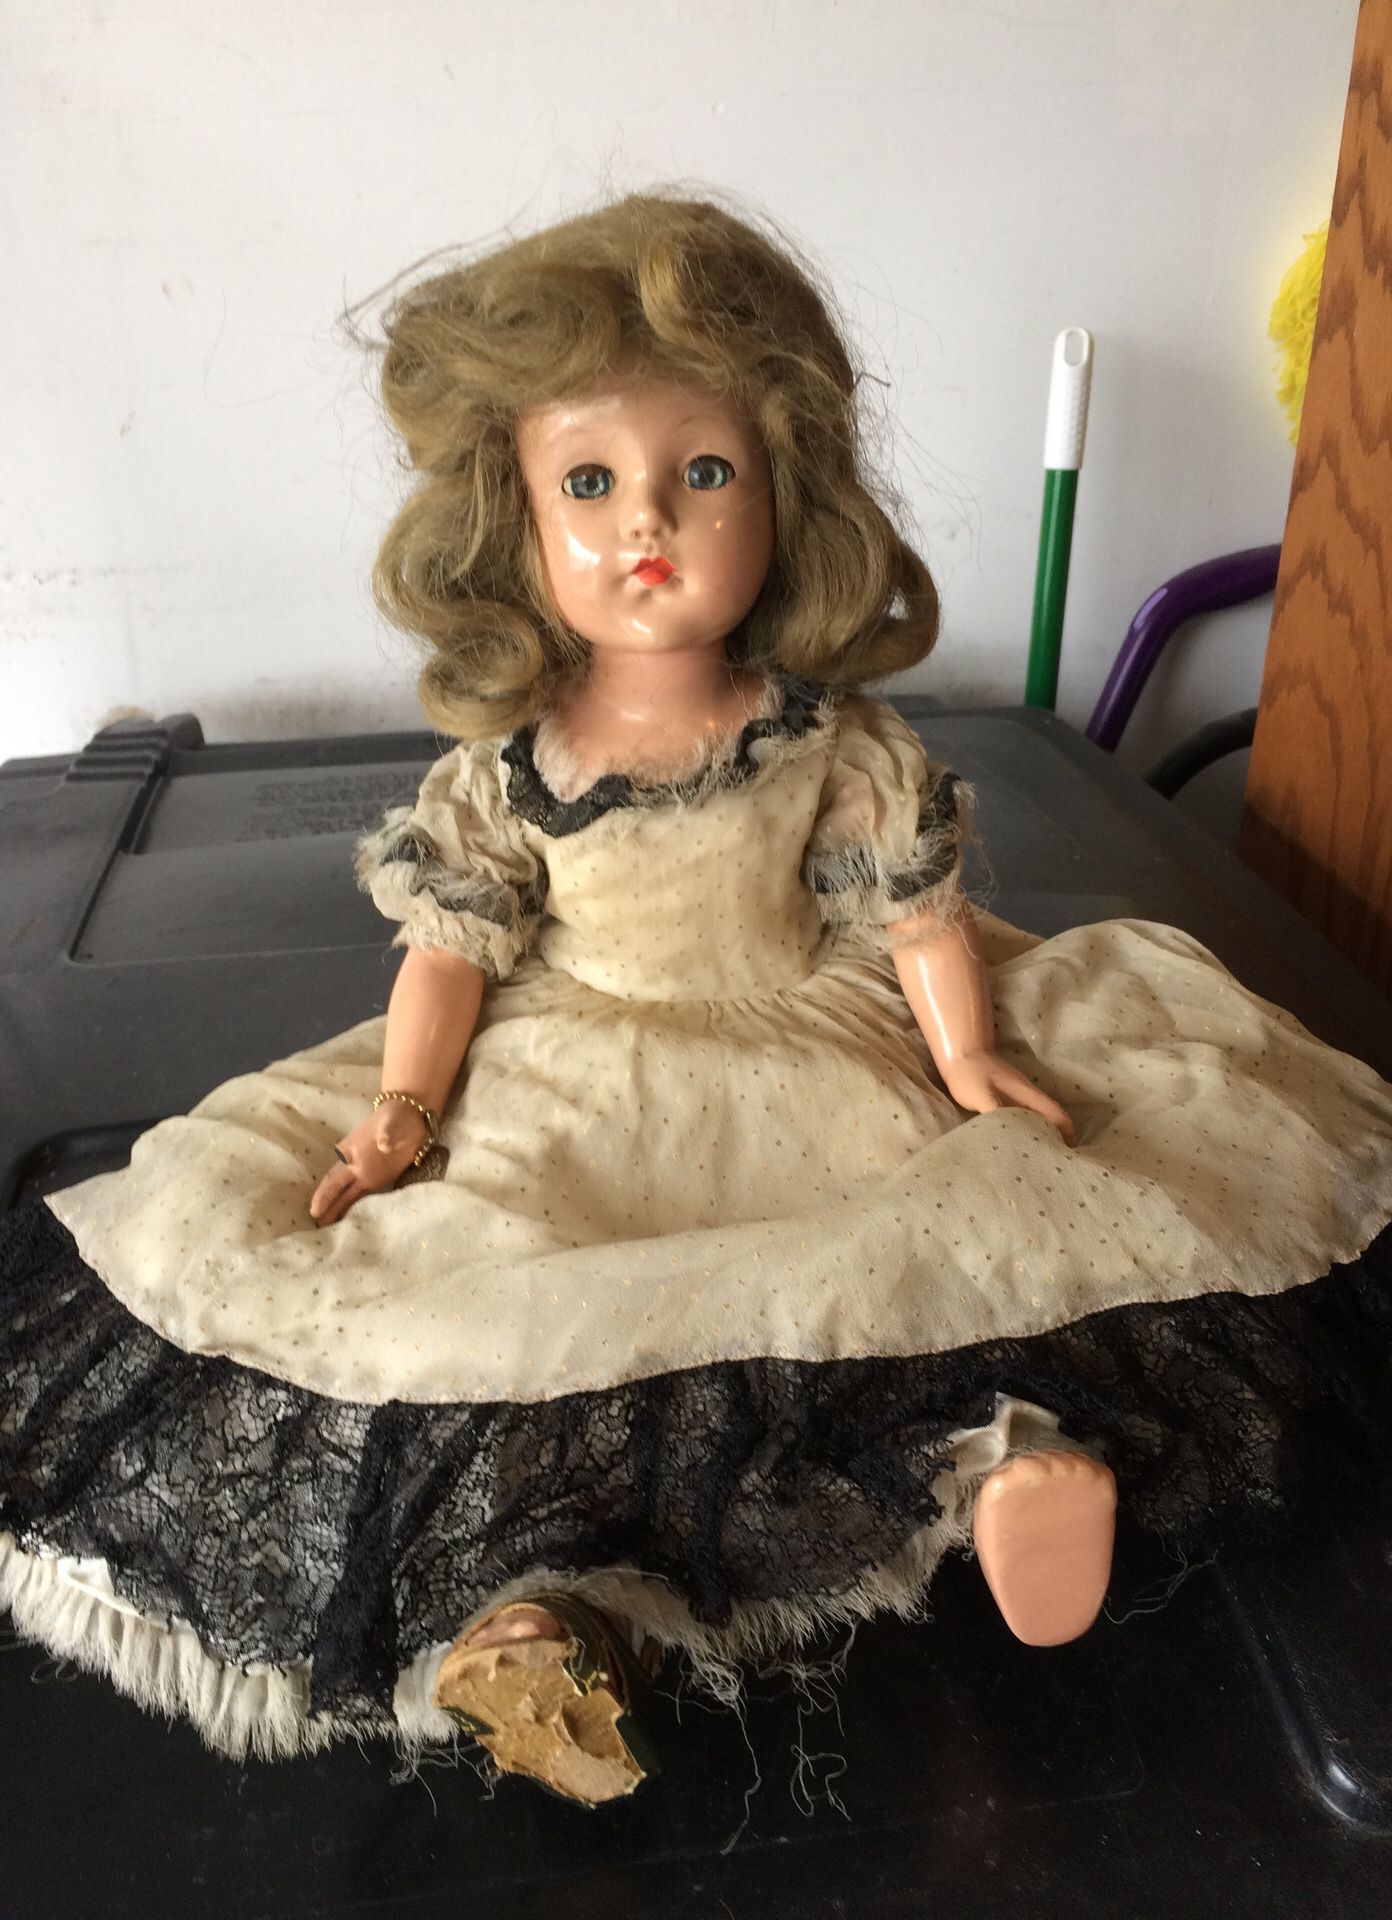 Antique doll for sale